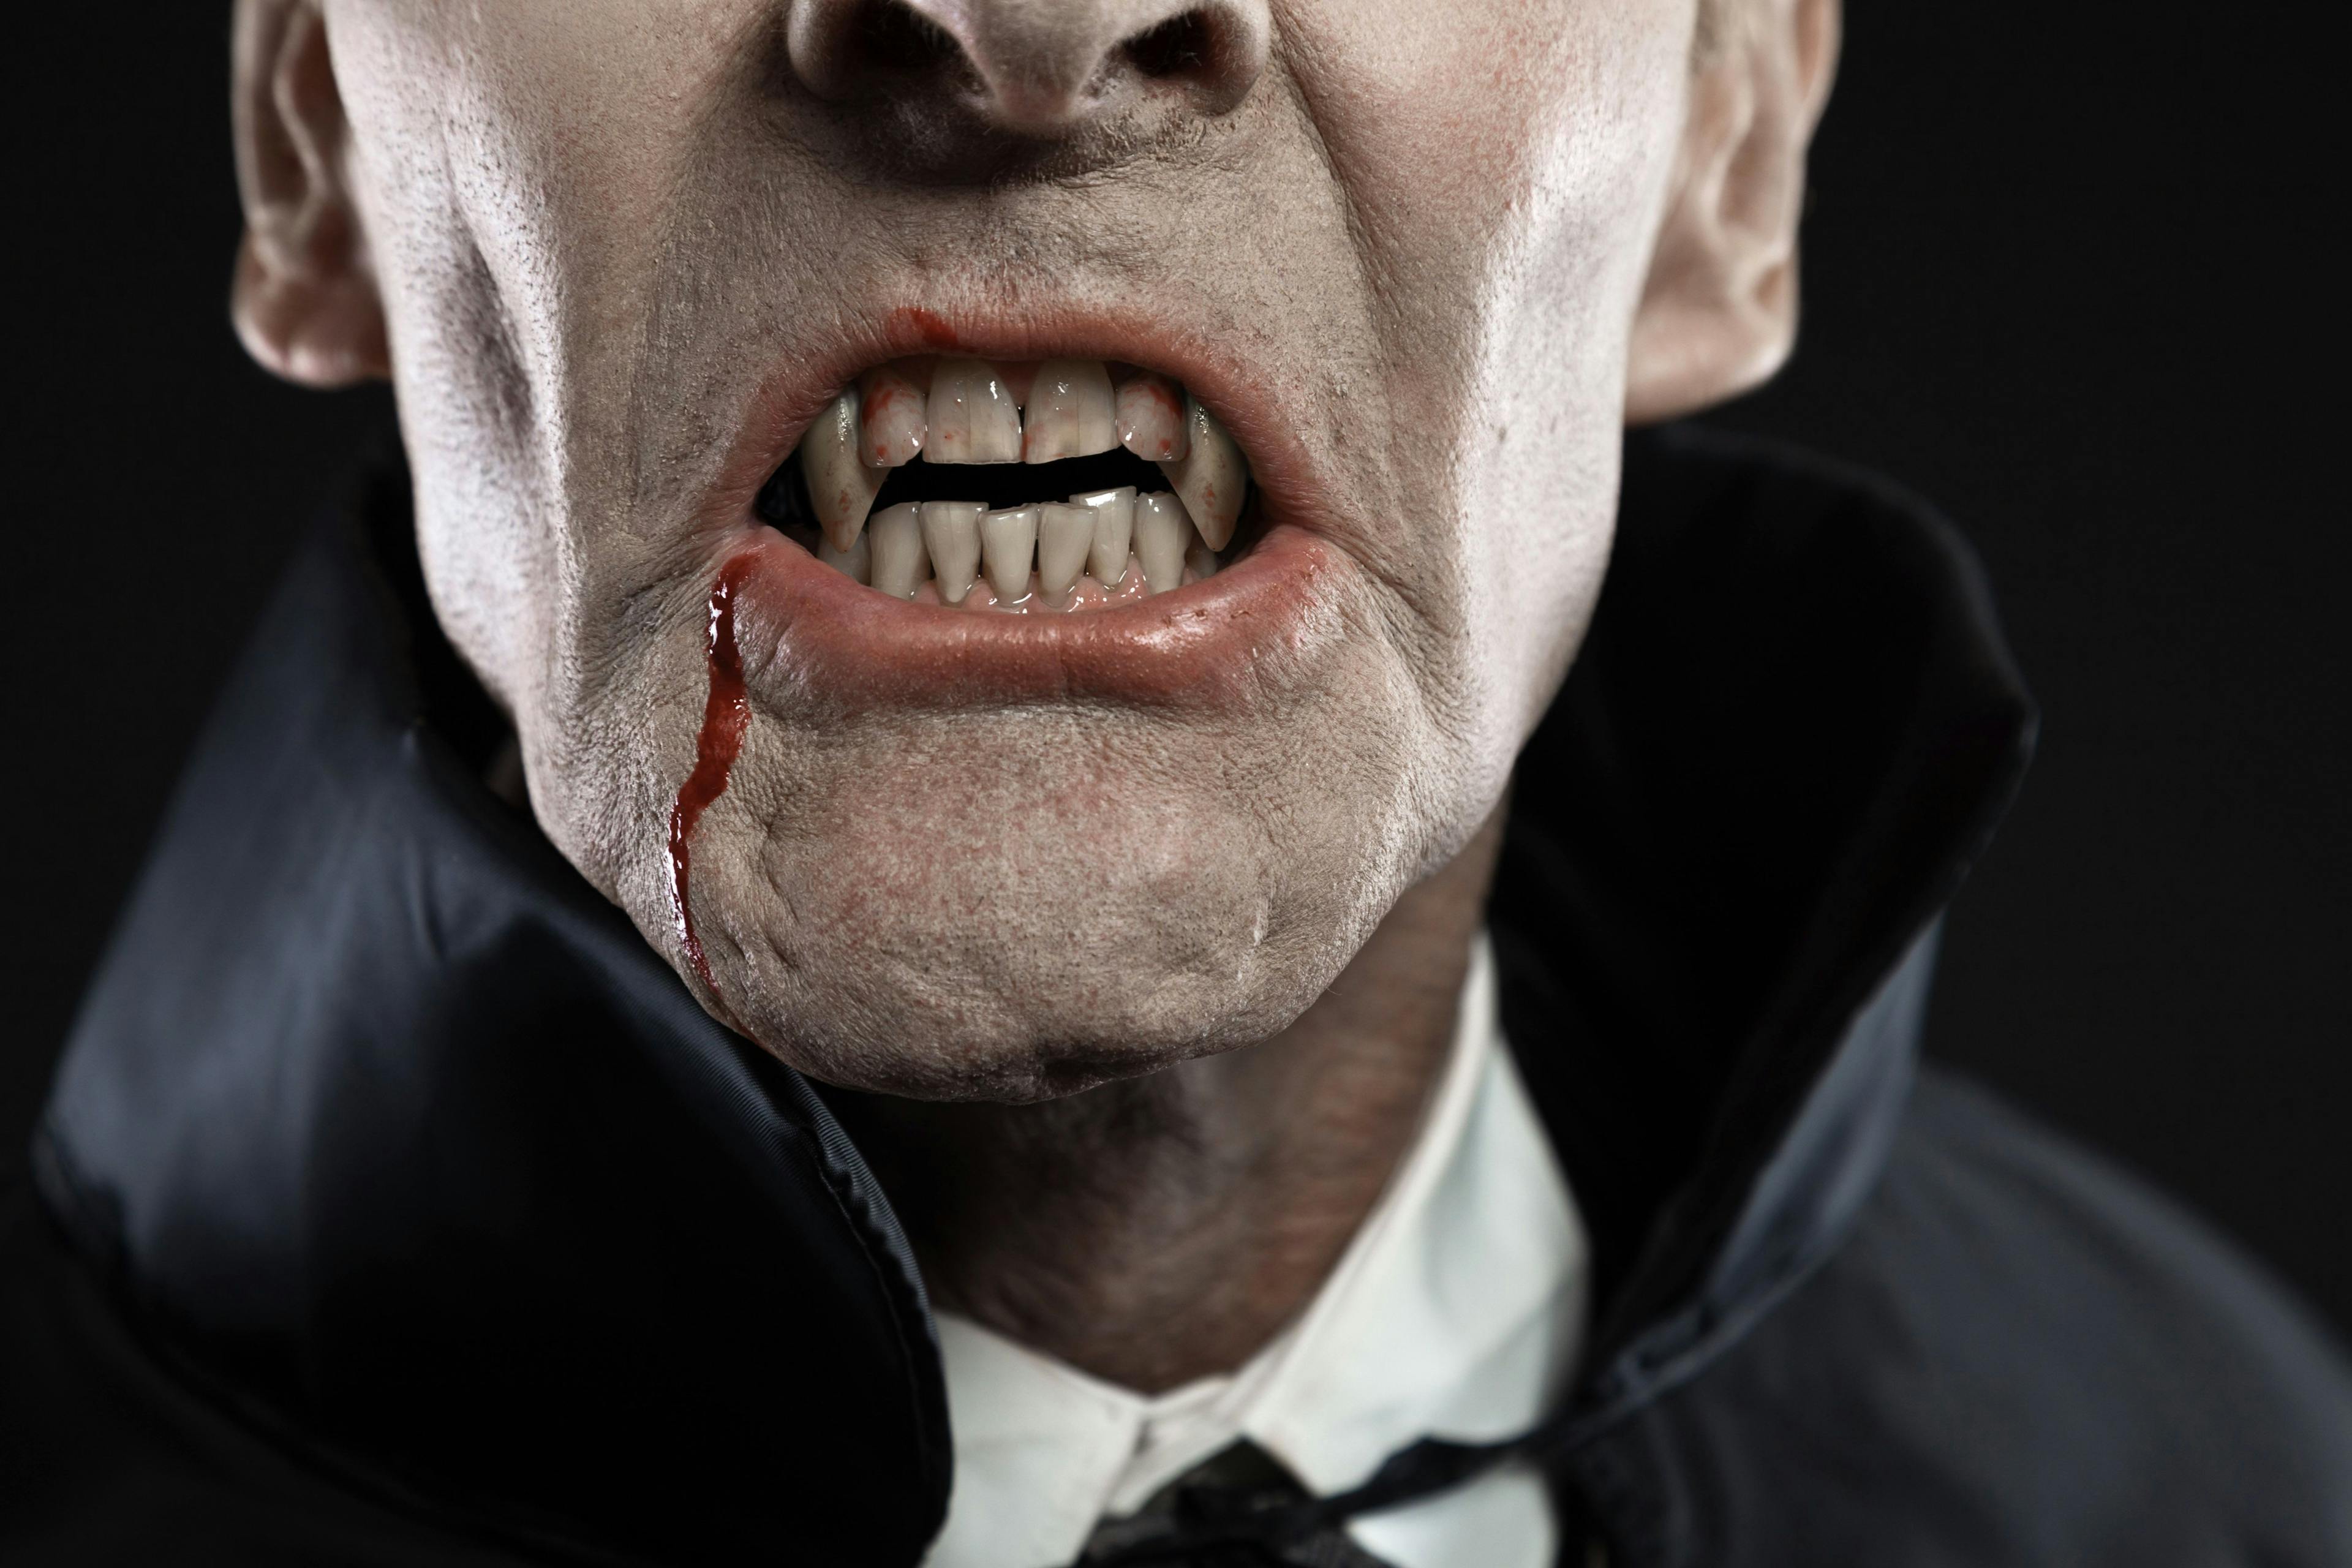 Close-up of dracula with black cape showing his scary teeth. Vam | Image Credit: © ysbrandcosijn - stock.adobe.com